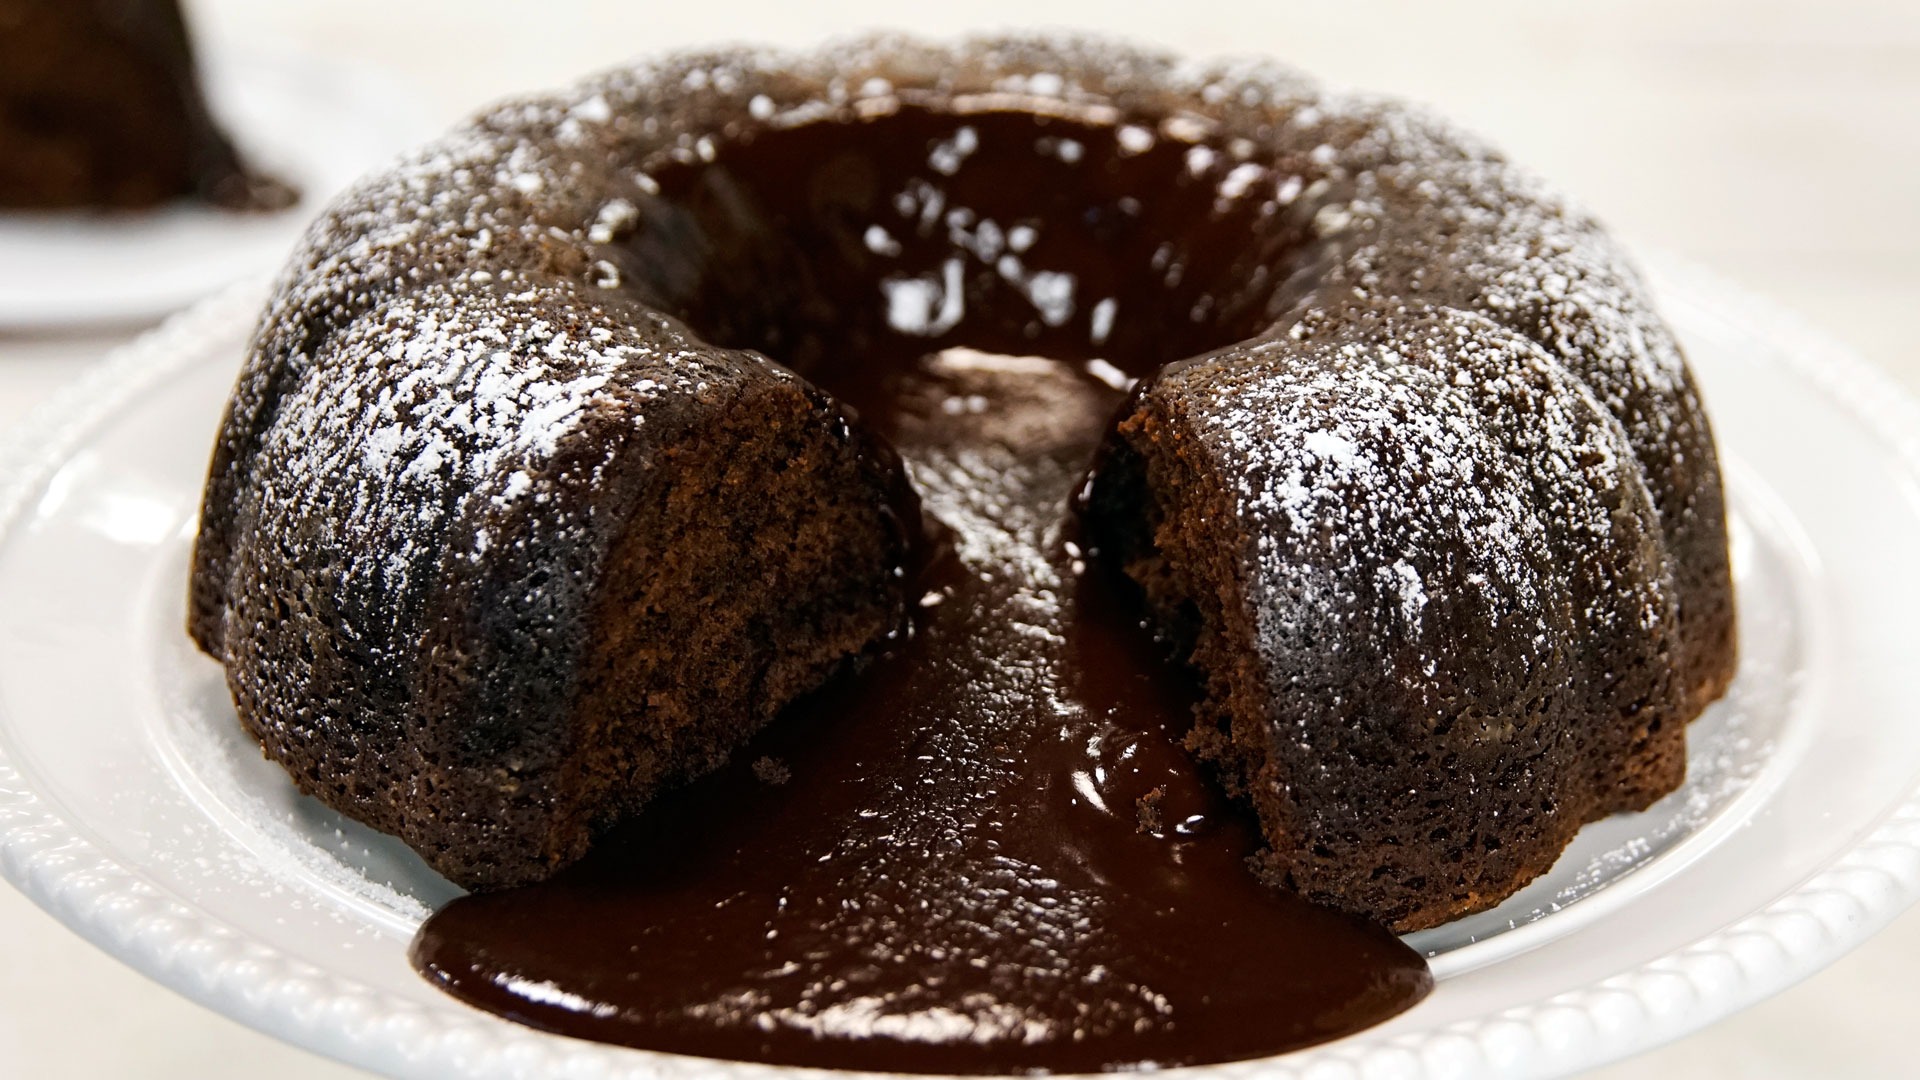 REVIEW: Trying the Best, Easiest Chocolate Lava Cake Recipes + Photos